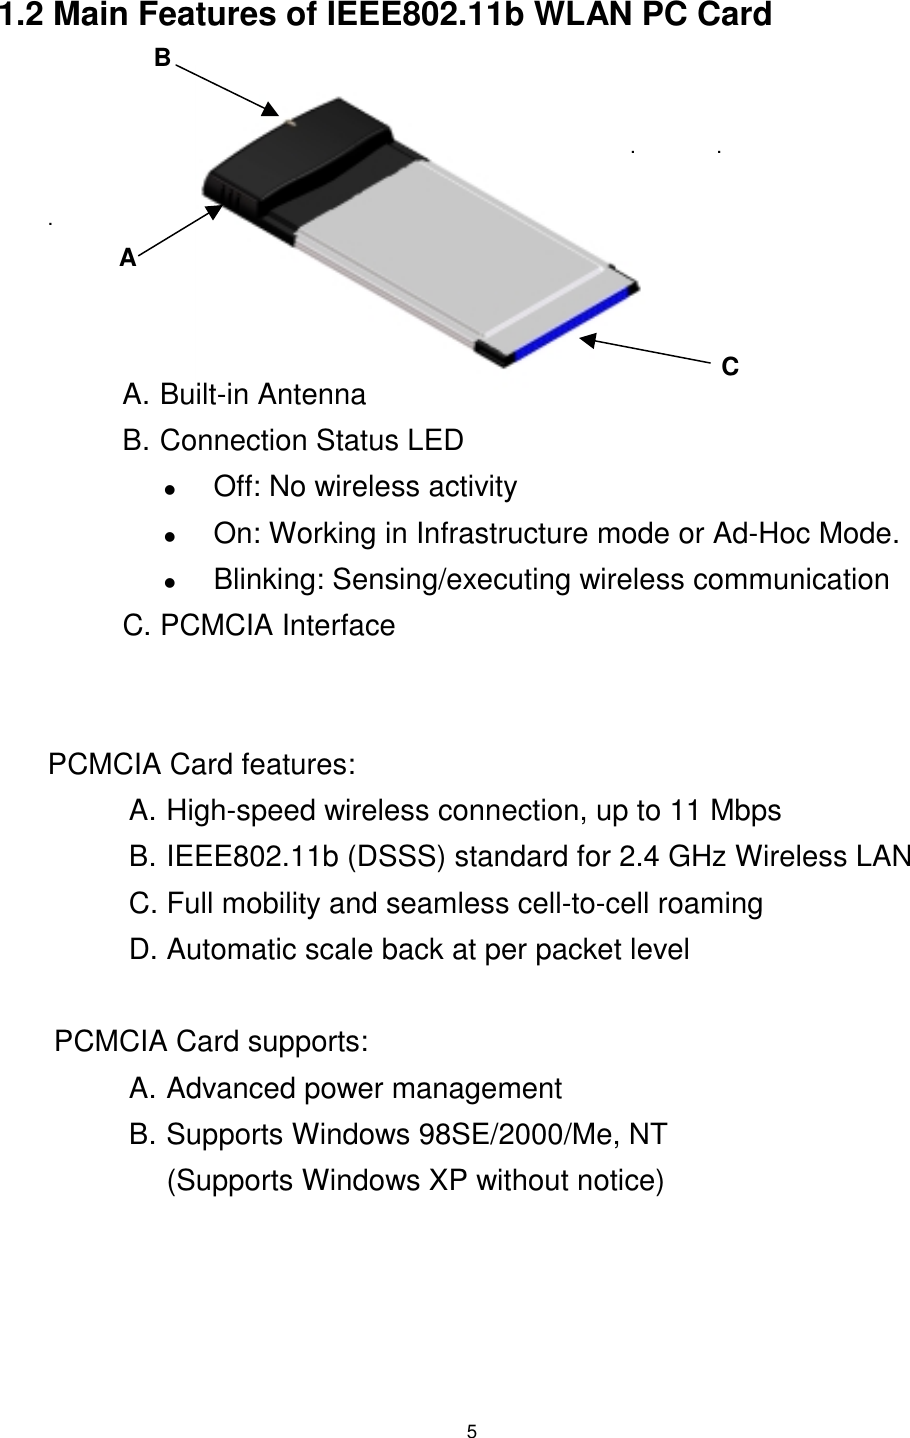  5  1.2 Main Features of IEEE802.11b WLAN PC Card                                                                                                        .              .  . A   A. Built-in Antenna B. Connection Status LED !  Off: No wireless activity !  On: Working in Infrastructure mode or Ad-Hoc Mode.  !  Blinking: Sensing/executing wireless communication C. PCMCIA Interface   PCMCIA Card features: A. High-speed wireless connection, up to 11 Mbps B. IEEE802.11b (DSSS) standard for 2.4 GHz Wireless LAN C. Full mobility and seamless cell-to-cell roaming D. Automatic scale back at per packet level  PCMCIA Card supports: A. Advanced power management B. Supports Windows 98SE/2000/Me, NT (Supports Windows XP without notice) BC 